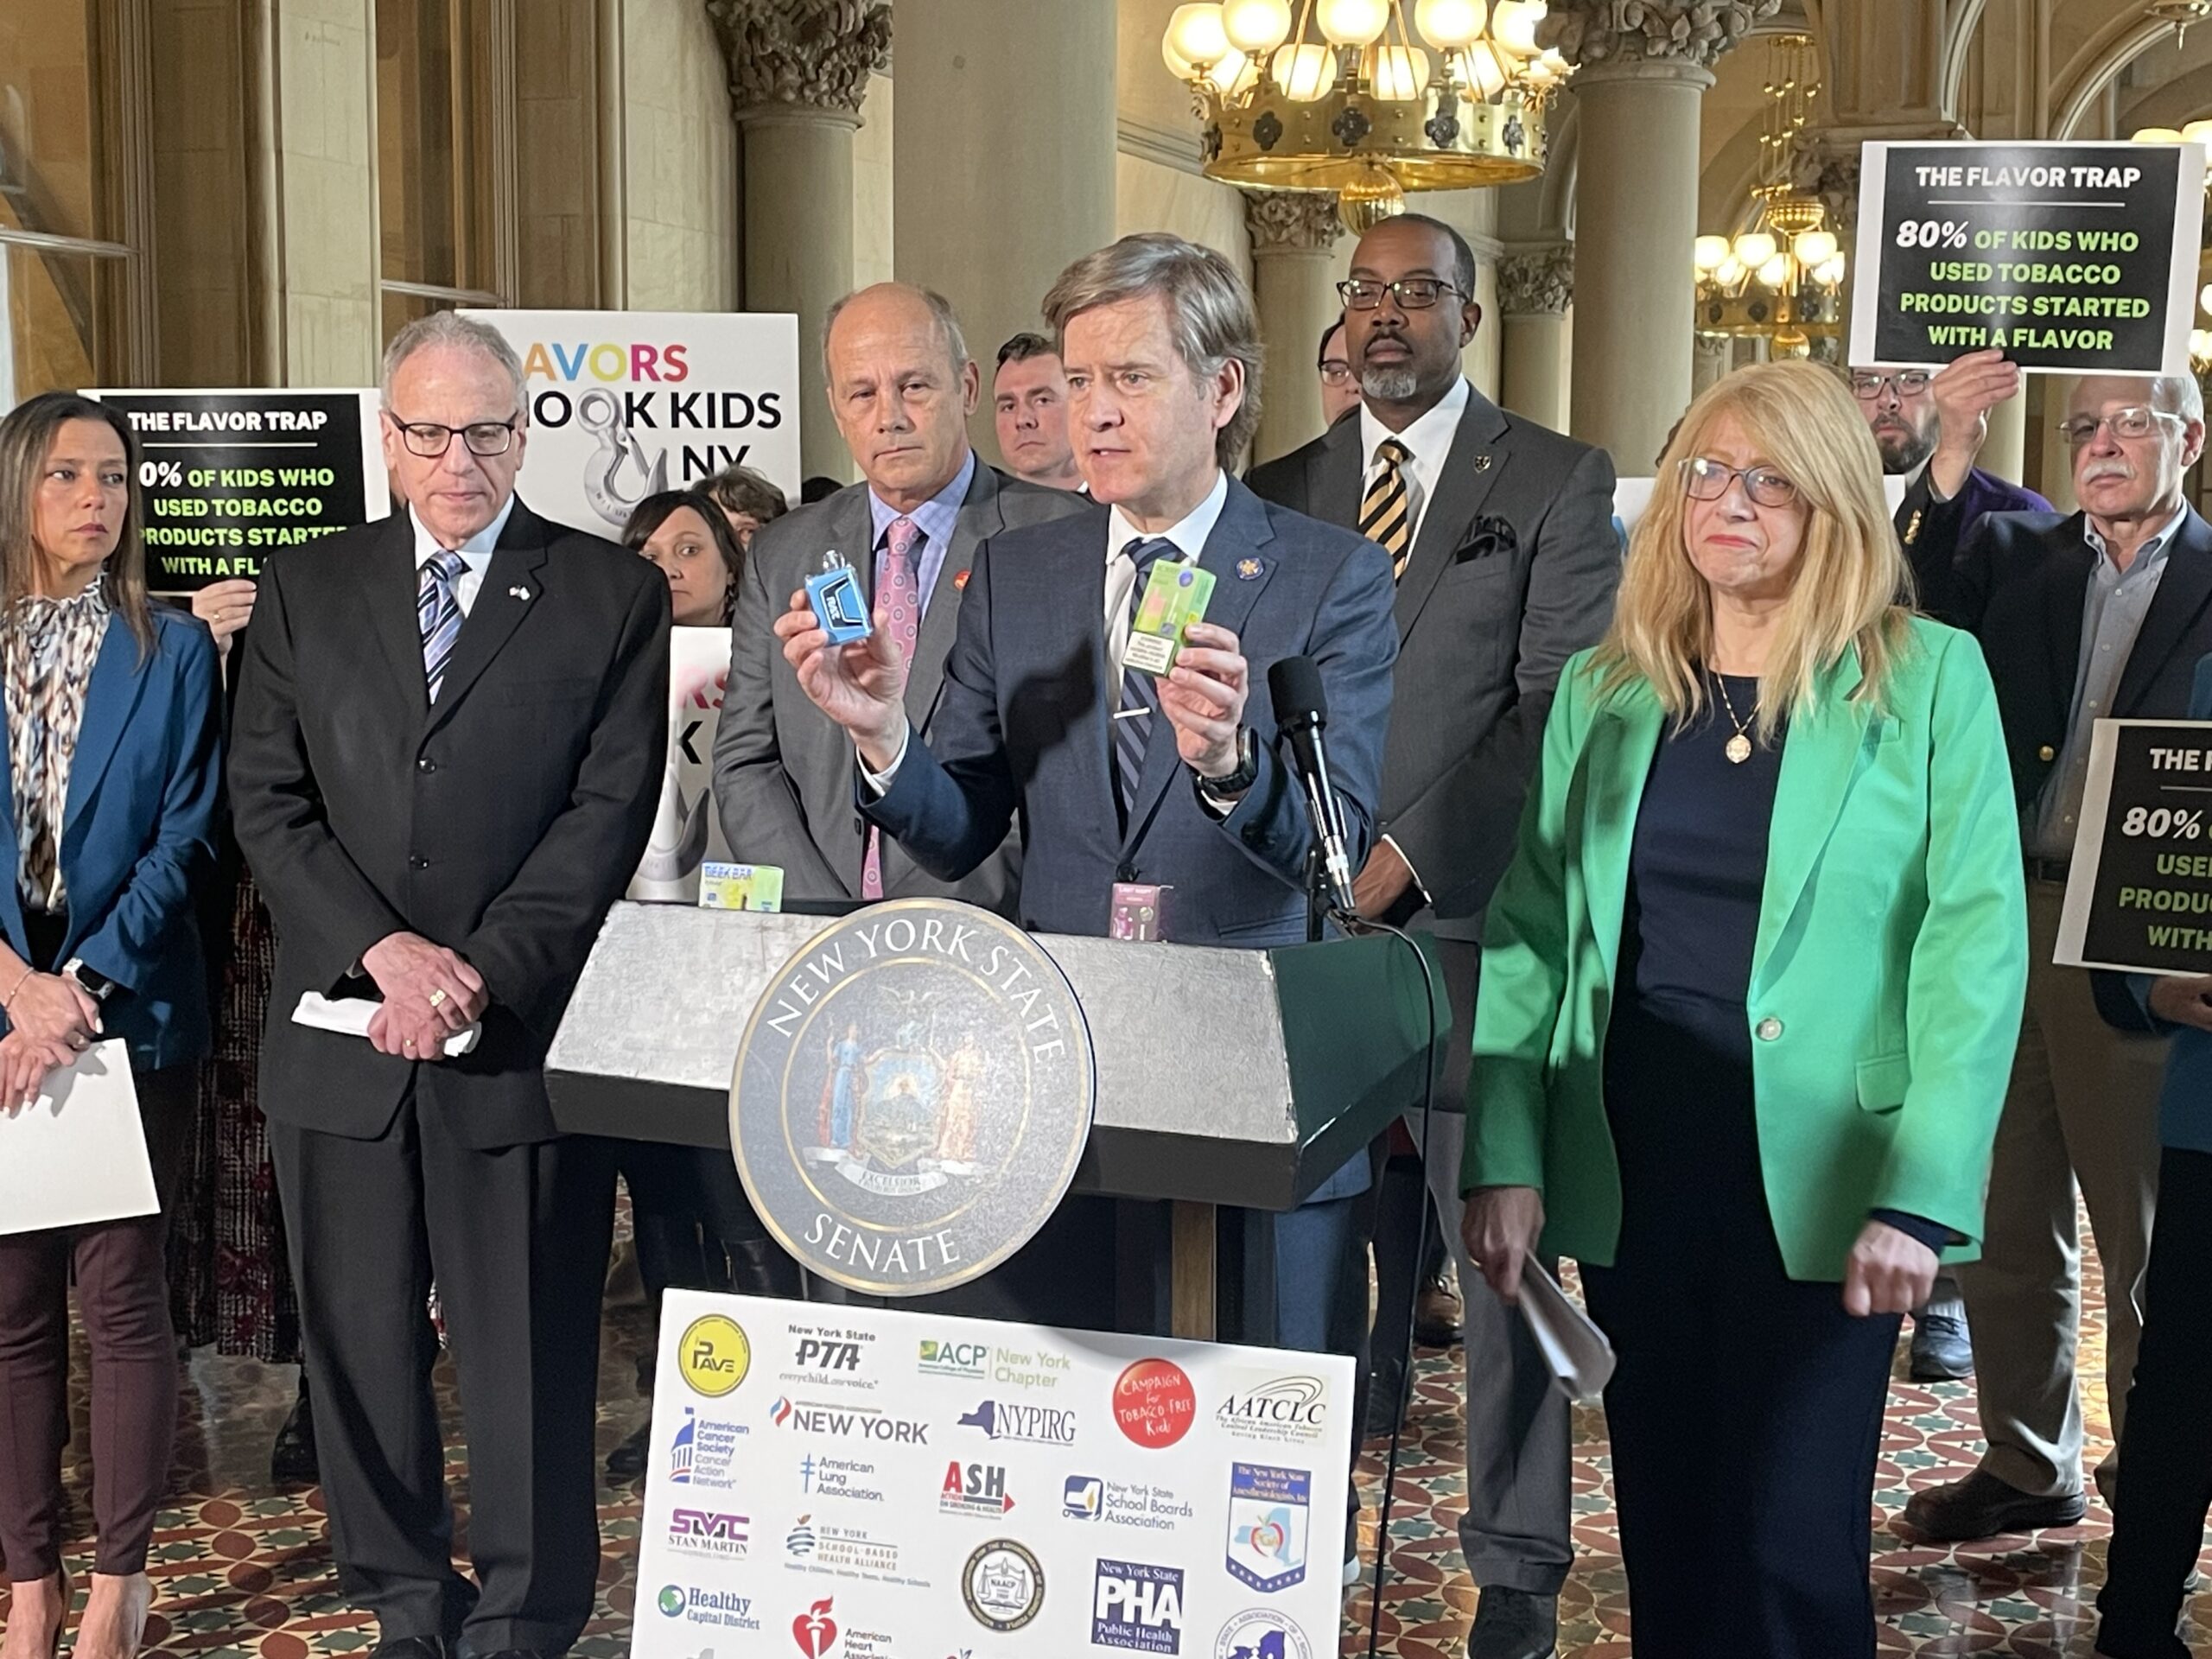 Democratic lawmakers want to close the loopholes that allow for retailers to sell flavored vapes despite a 2020 bill that banned them.